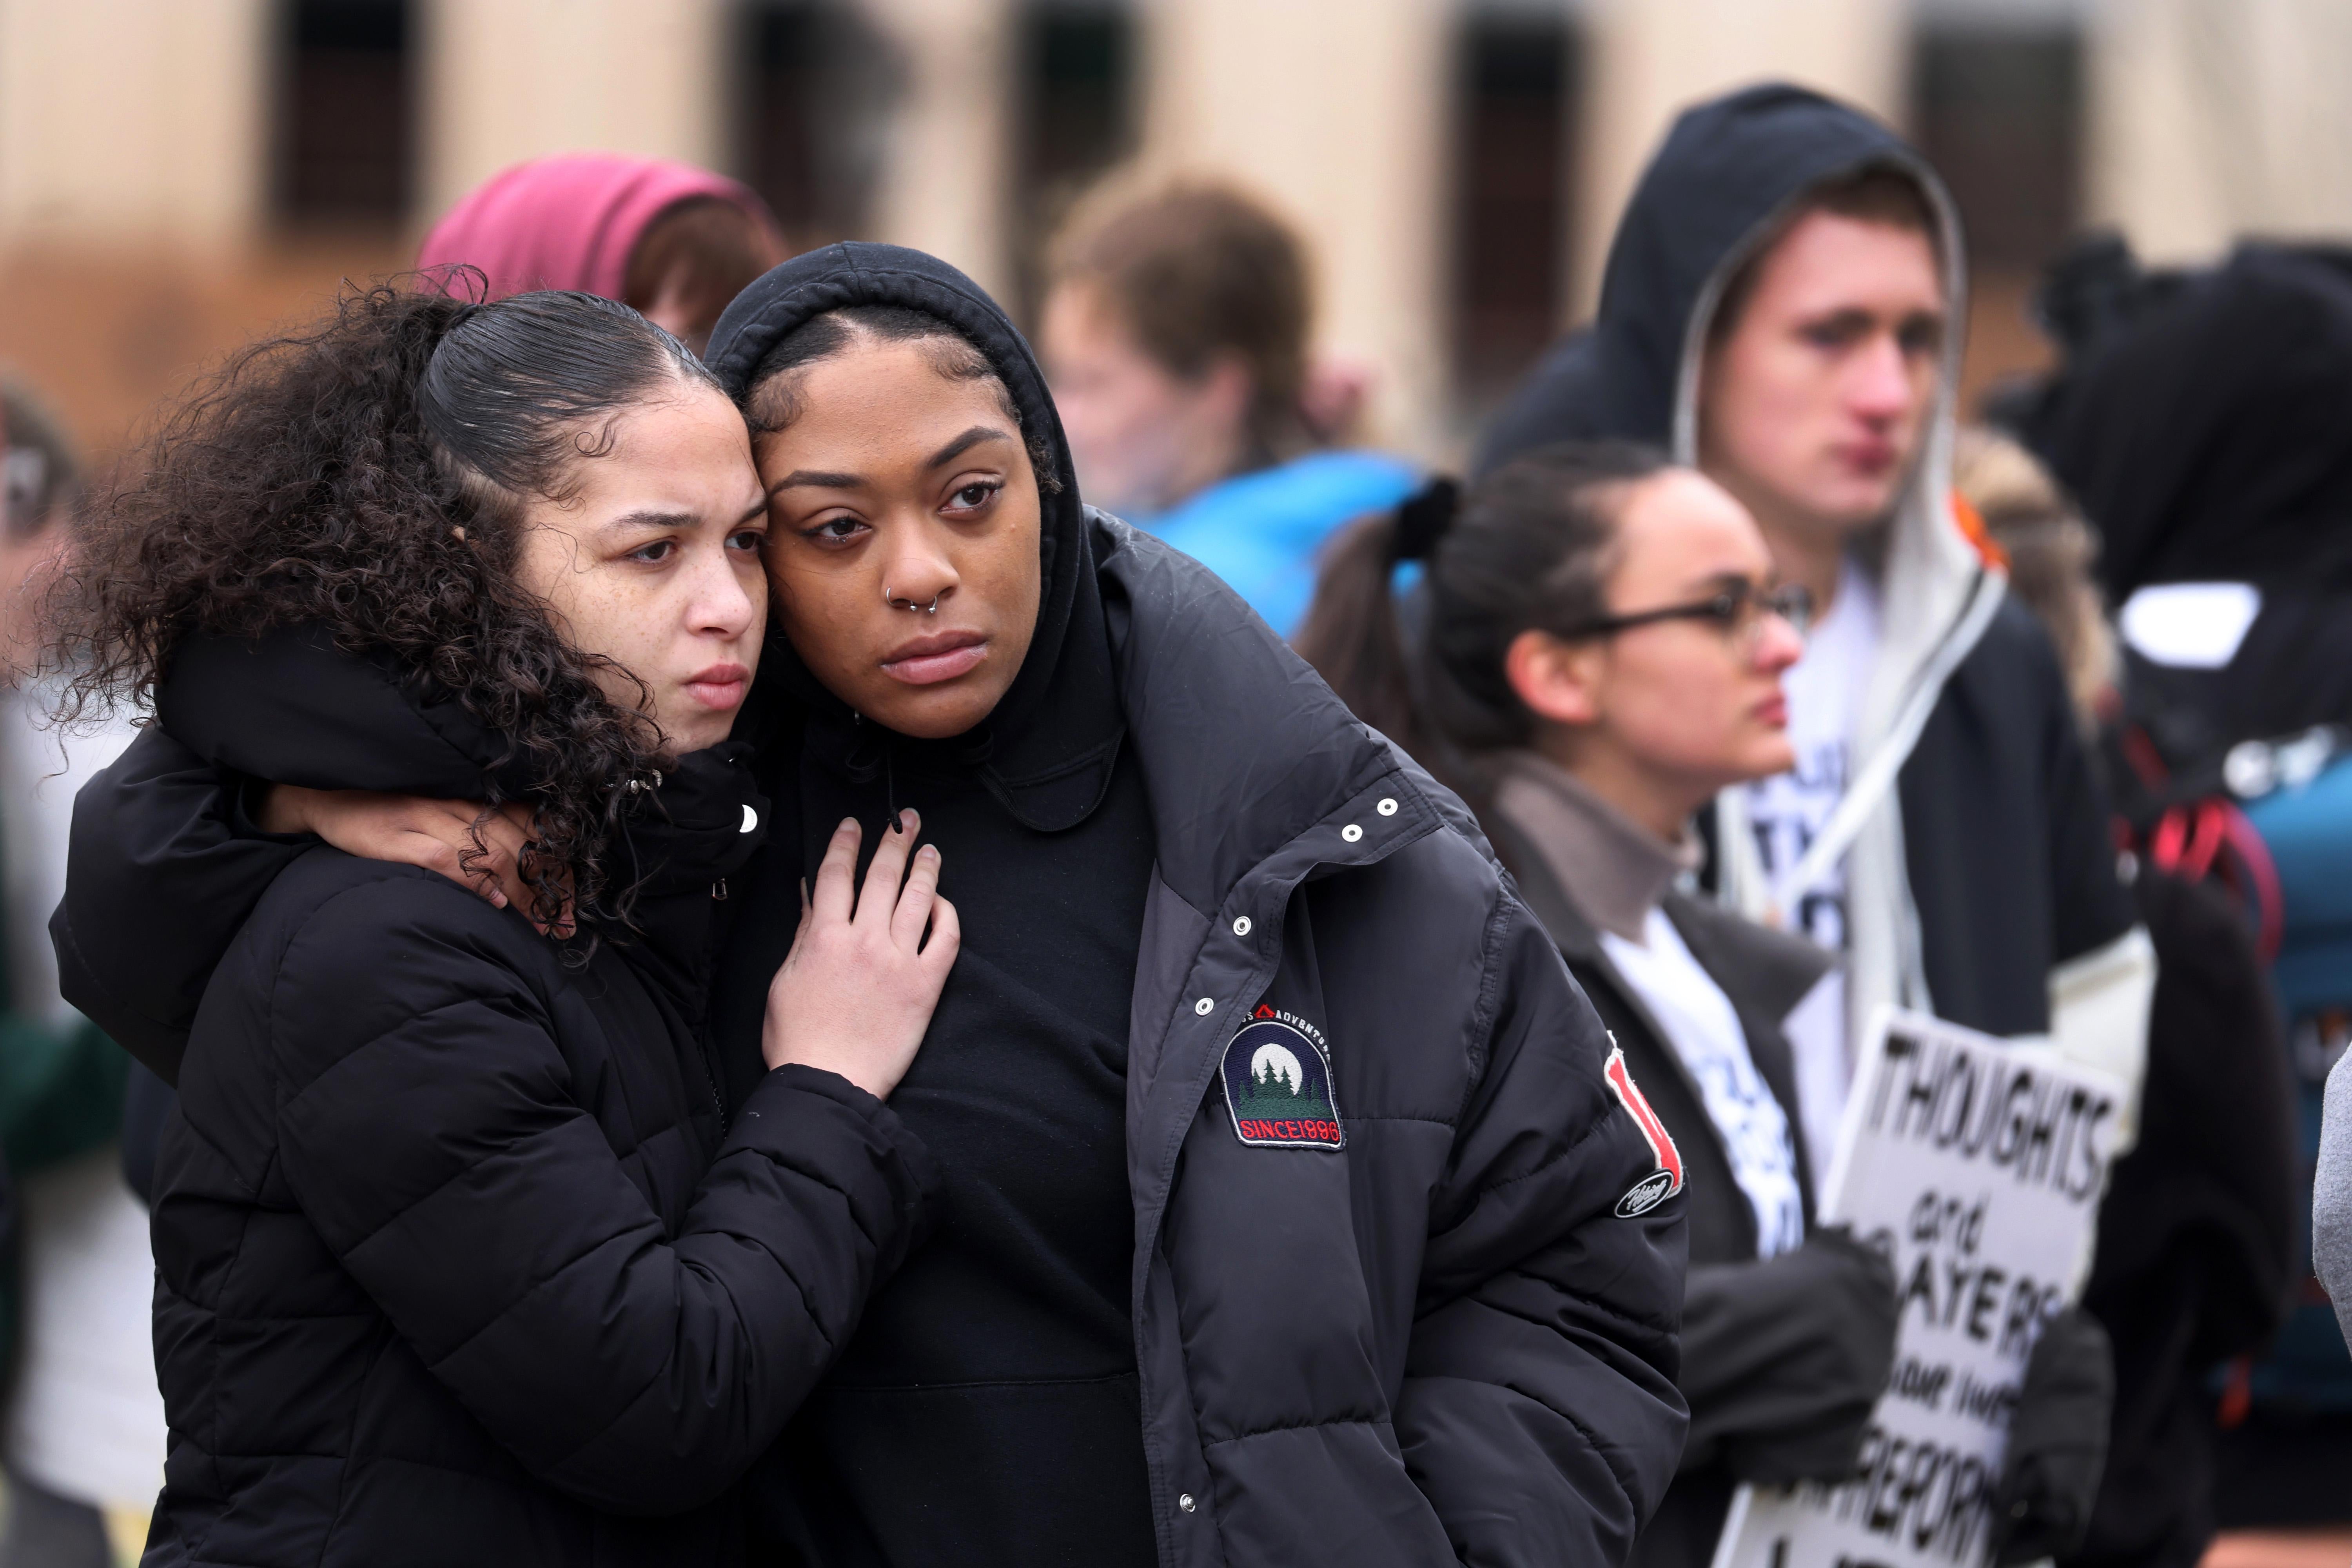 “I Don’t Feel Like a Real Victim. And Yet I Feel So Messed Up”: How College Kids Are Coping With the Shooting at Michigan State Molly Olmstead